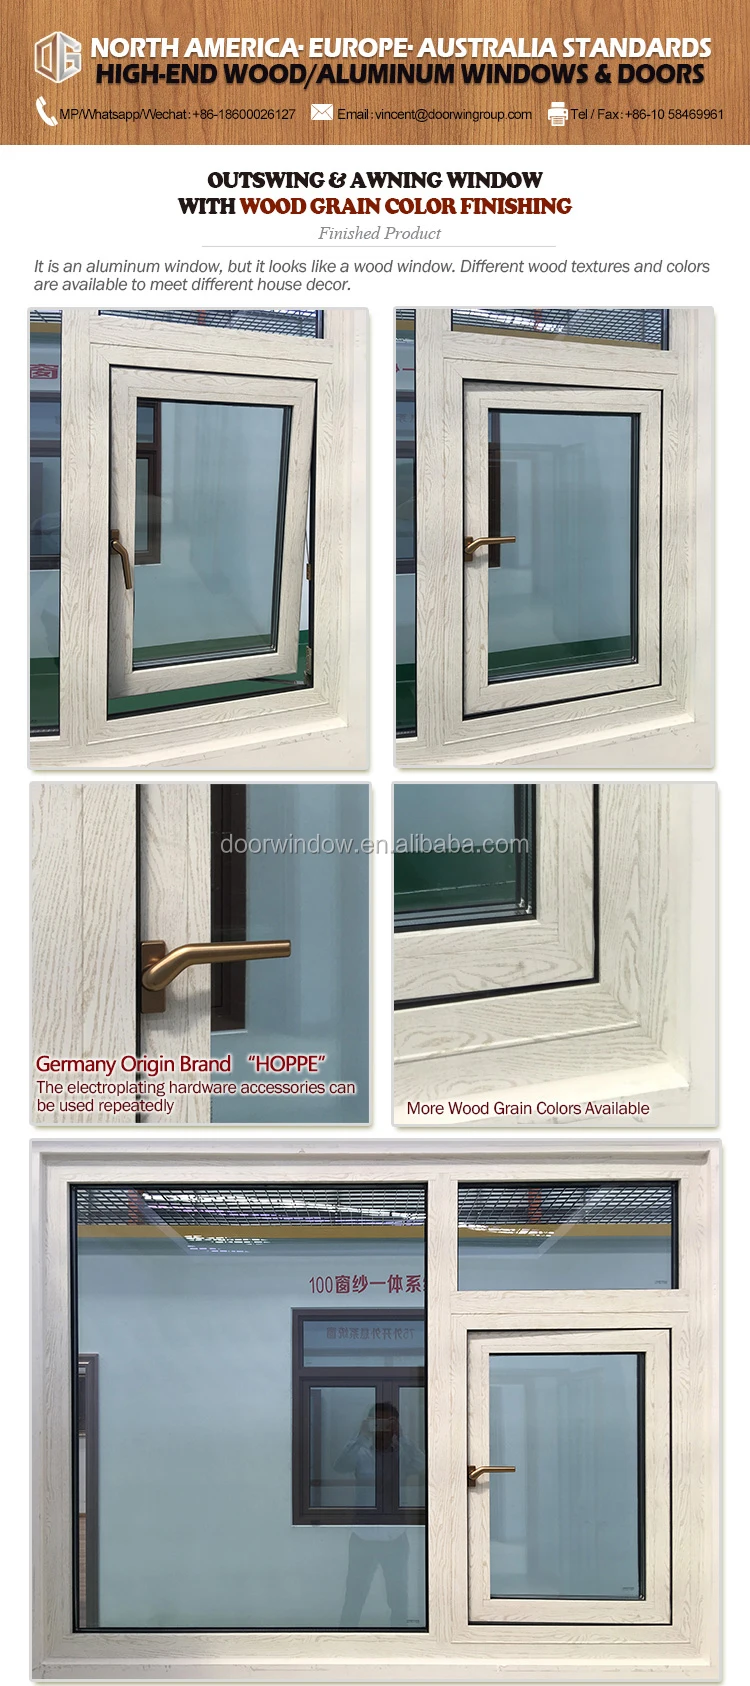 Purchasing Hollow glass anodized aluminum awning window high quality fixed thermal break casement